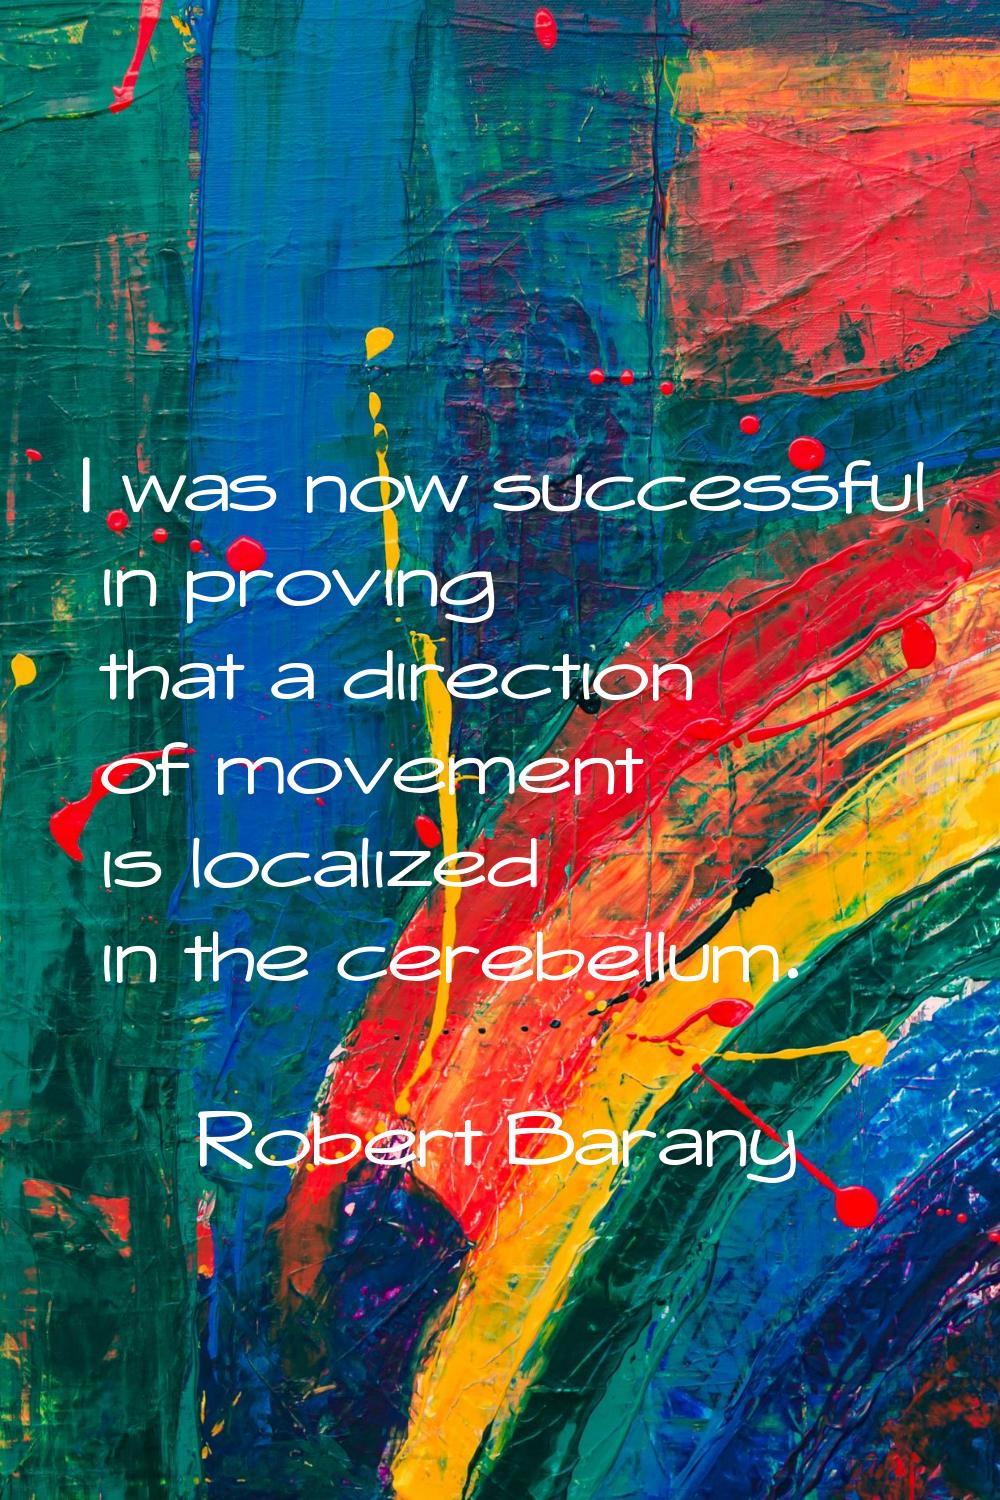 I was now successful in proving that a direction of movement is localized in the cerebellum.